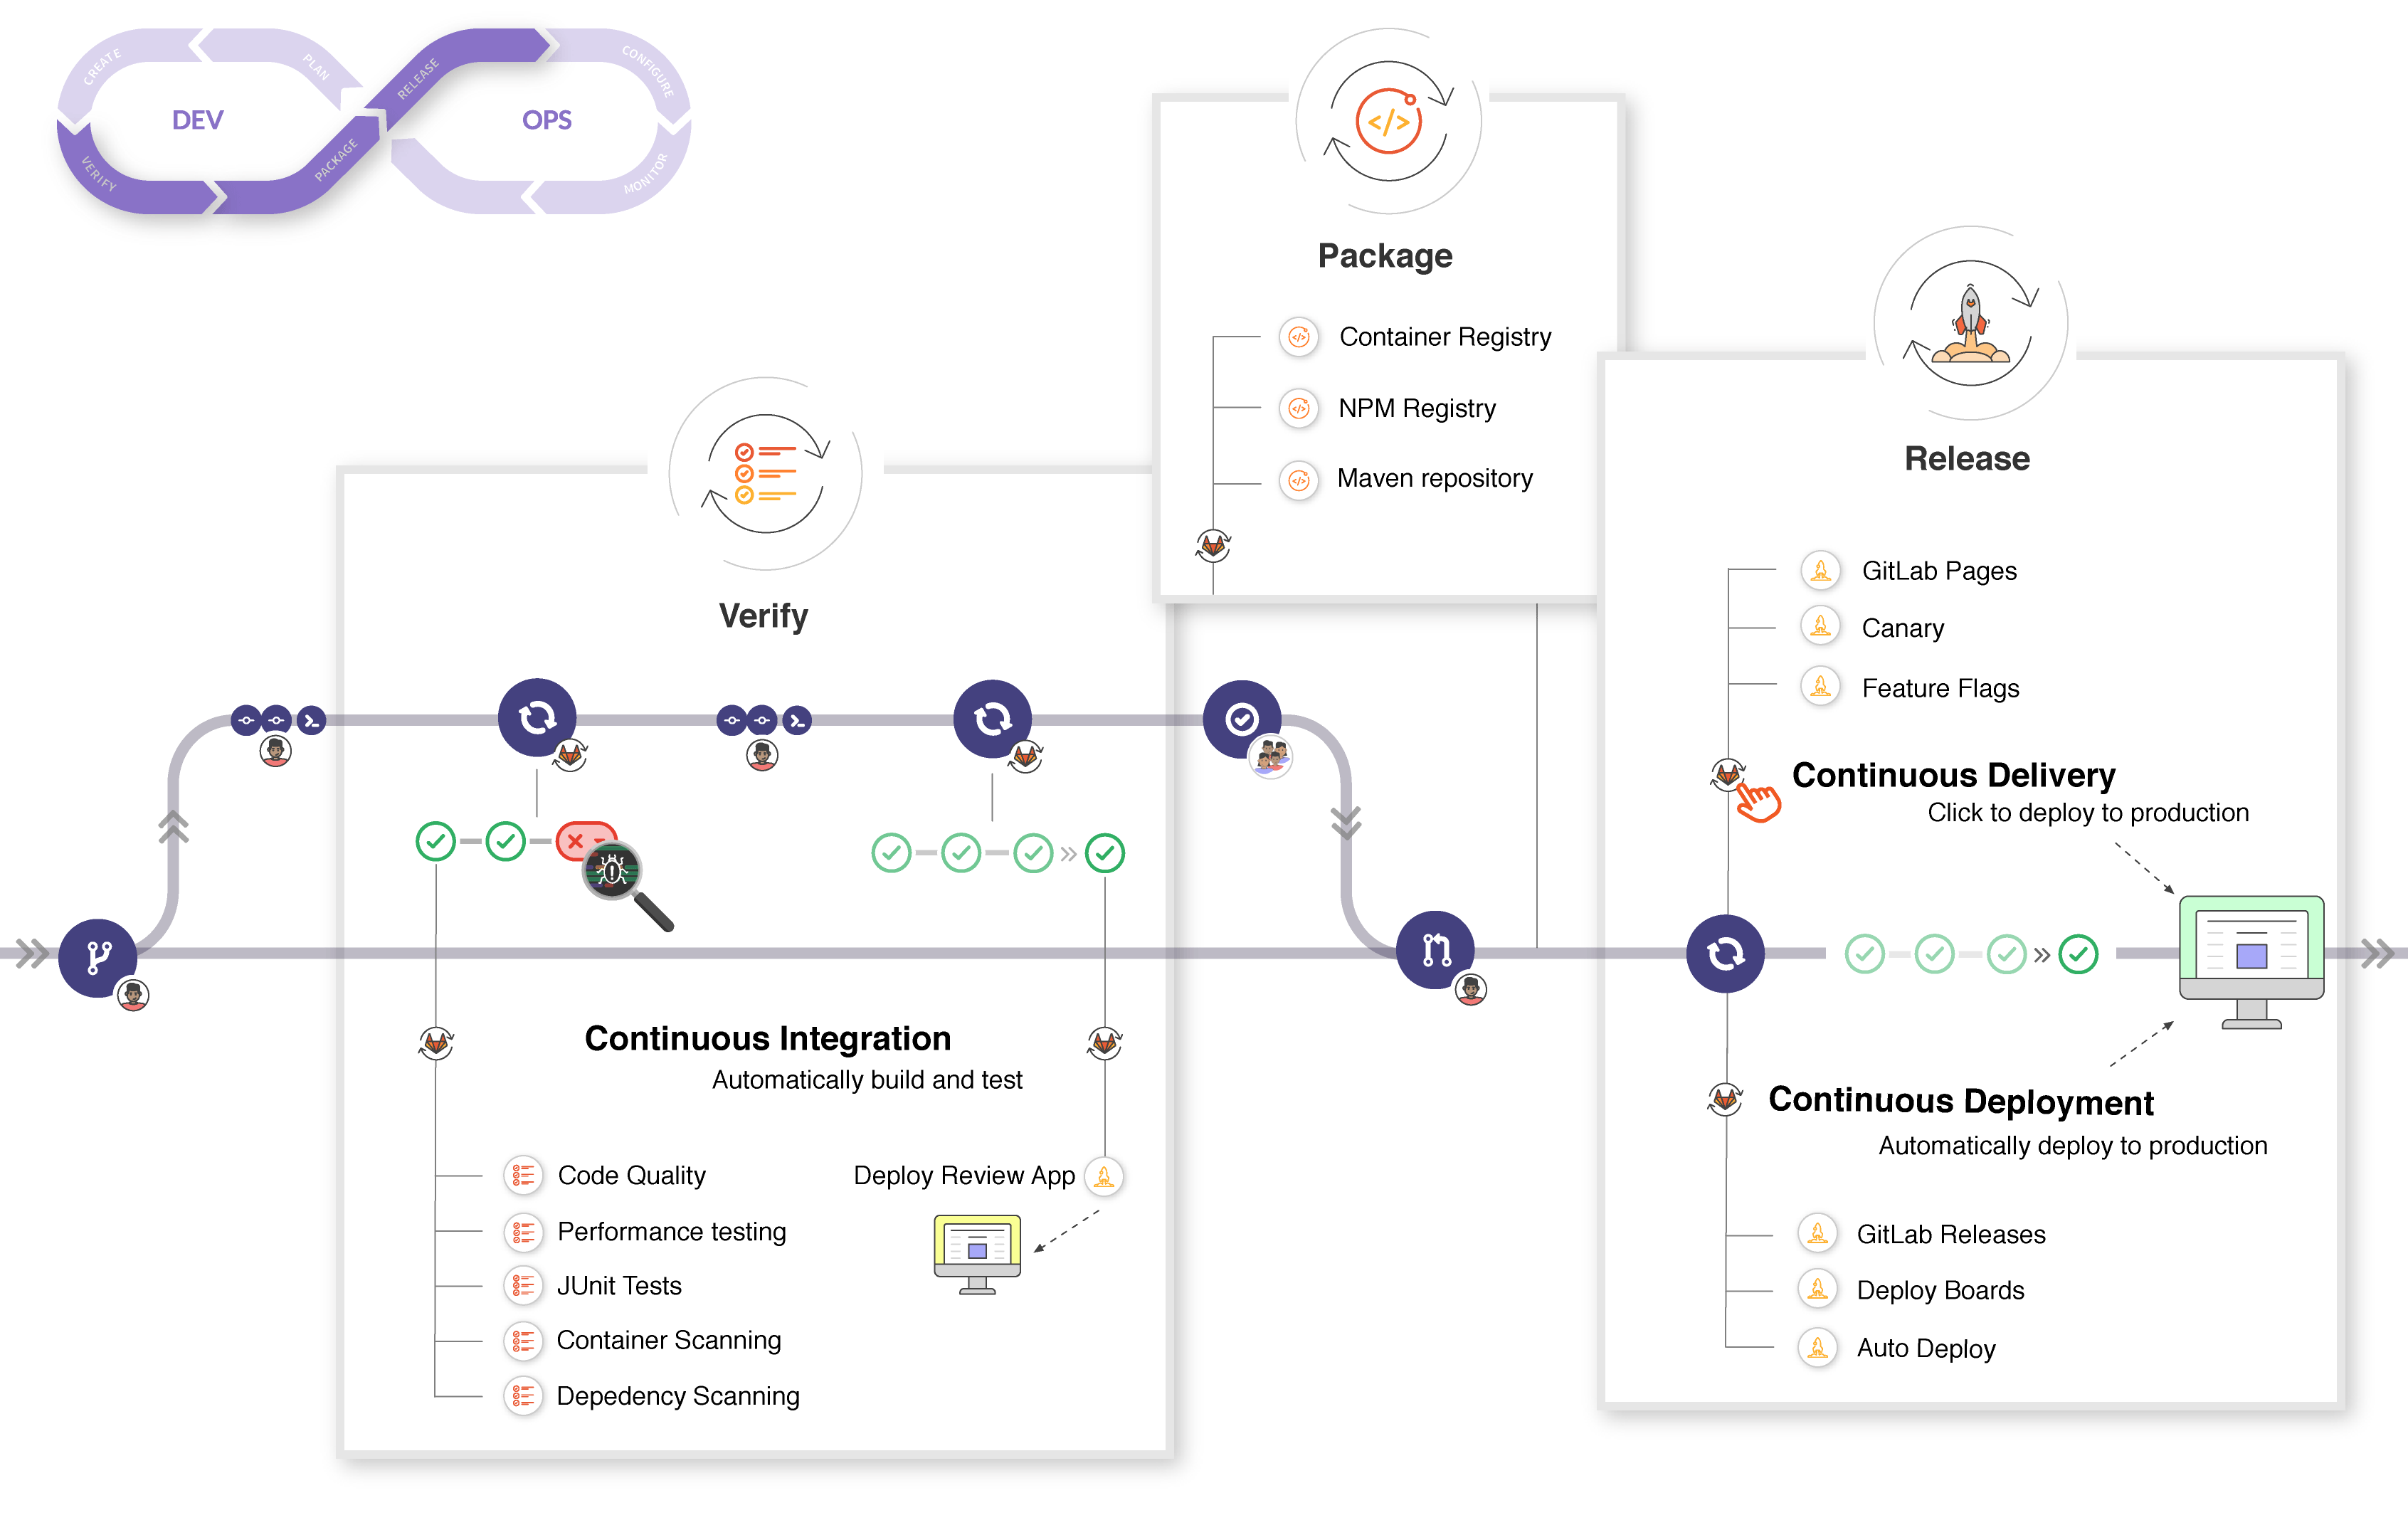 doc/ci/introduction/img/gitlab_workflow_example_extended_11_11.png